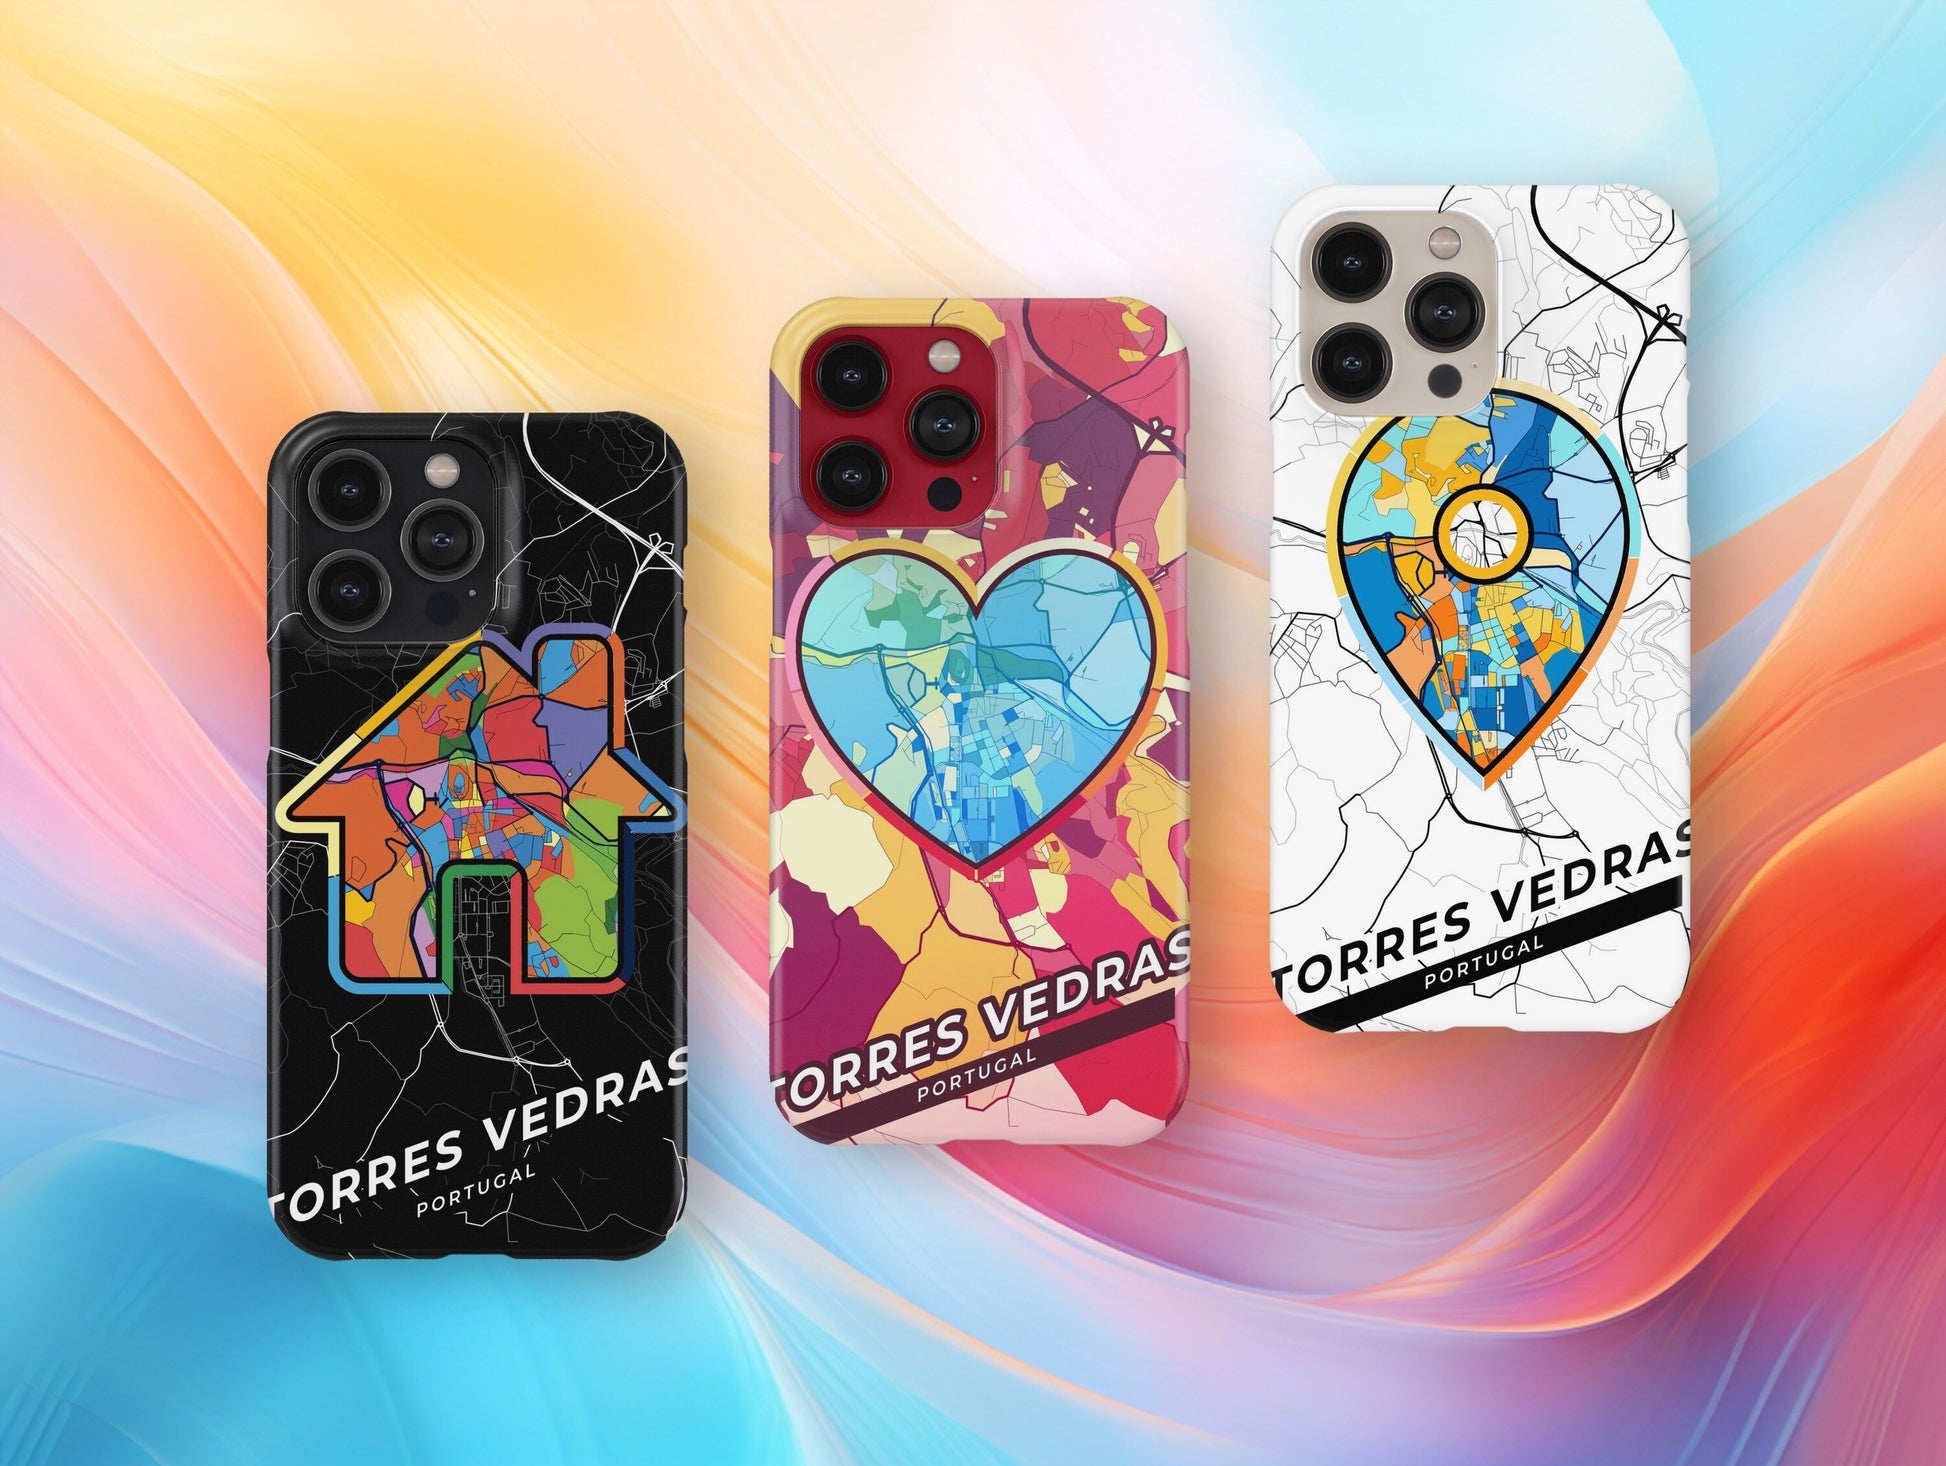 Torres Vedras Portugal slim phone case with colorful icon